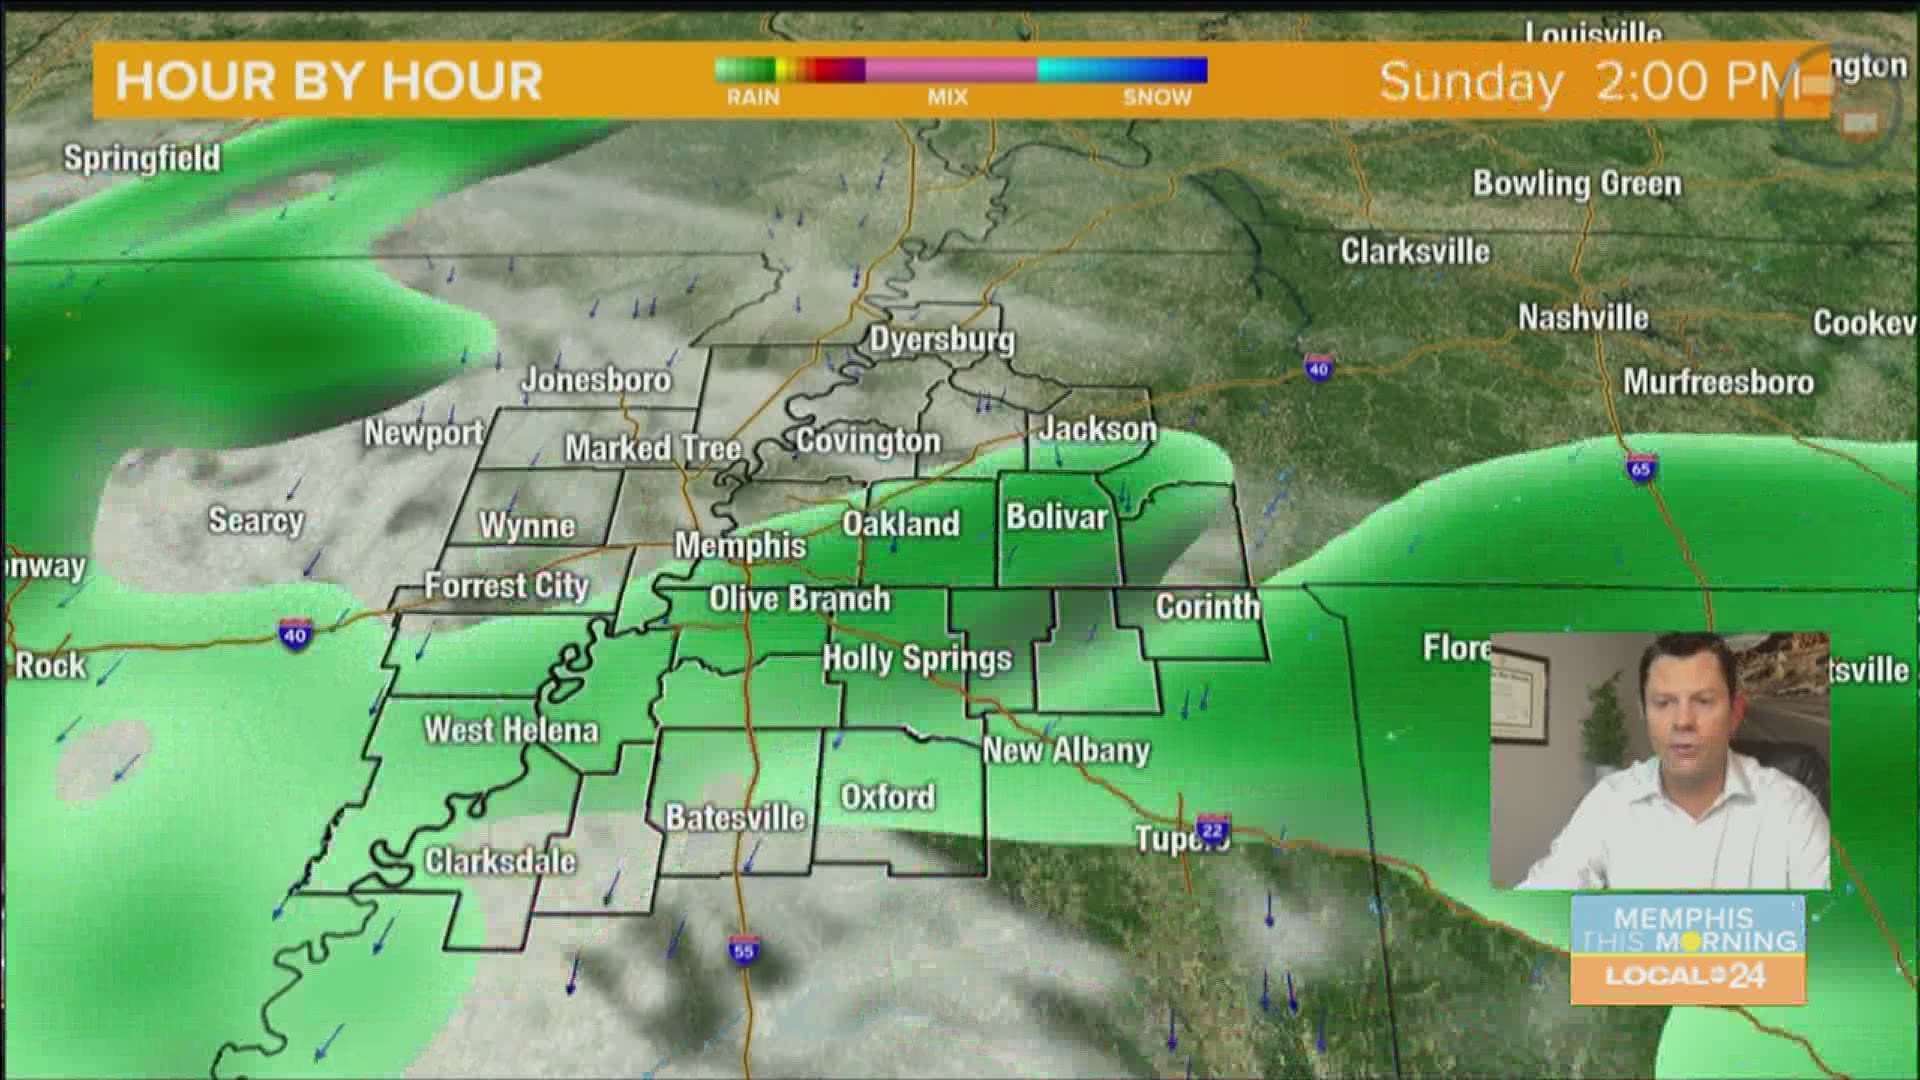 Local 24 News Chief Meteorologist John Bryant has your Friday weather forecast.